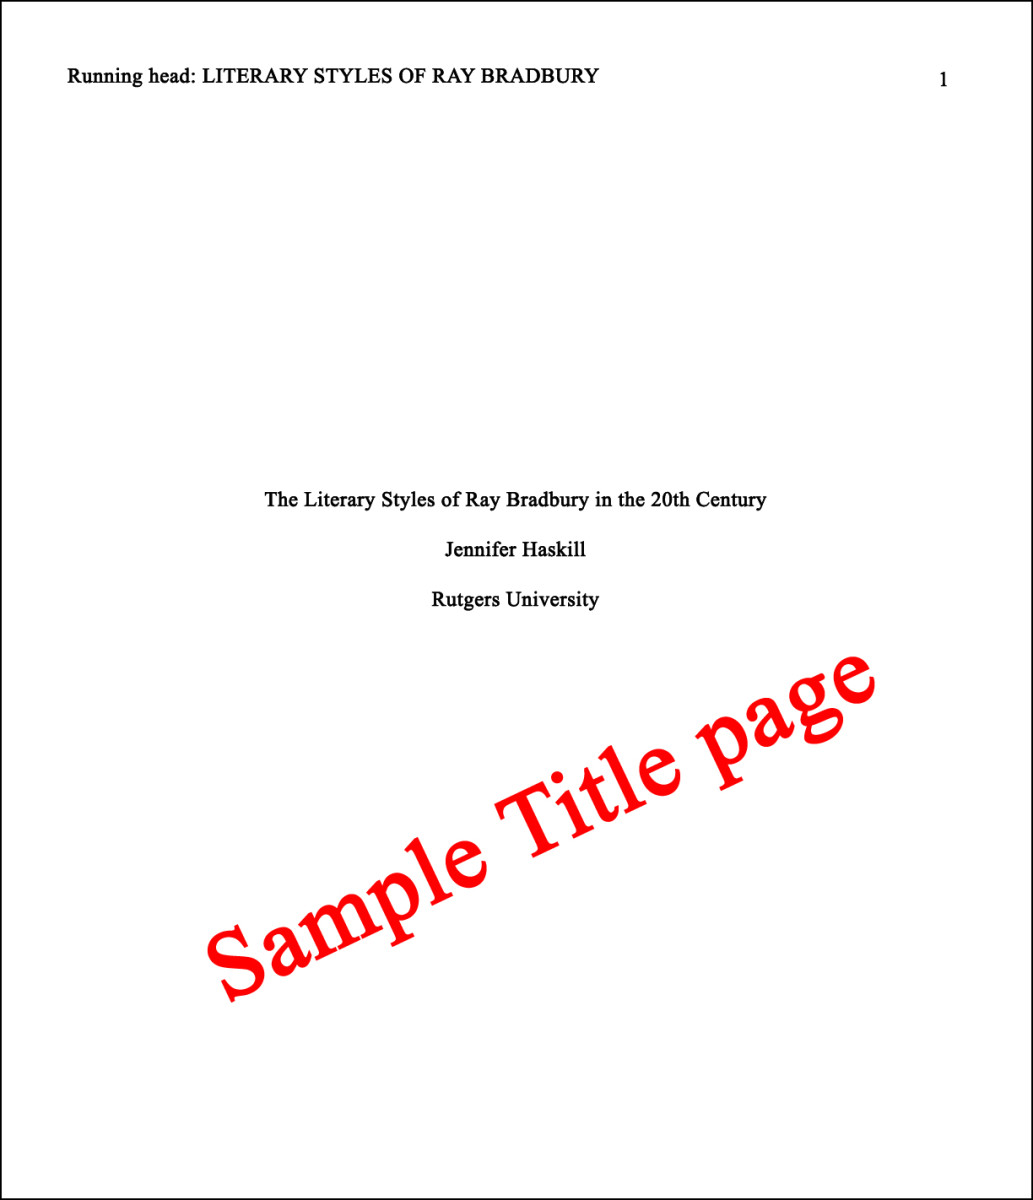 a cover page in apa format